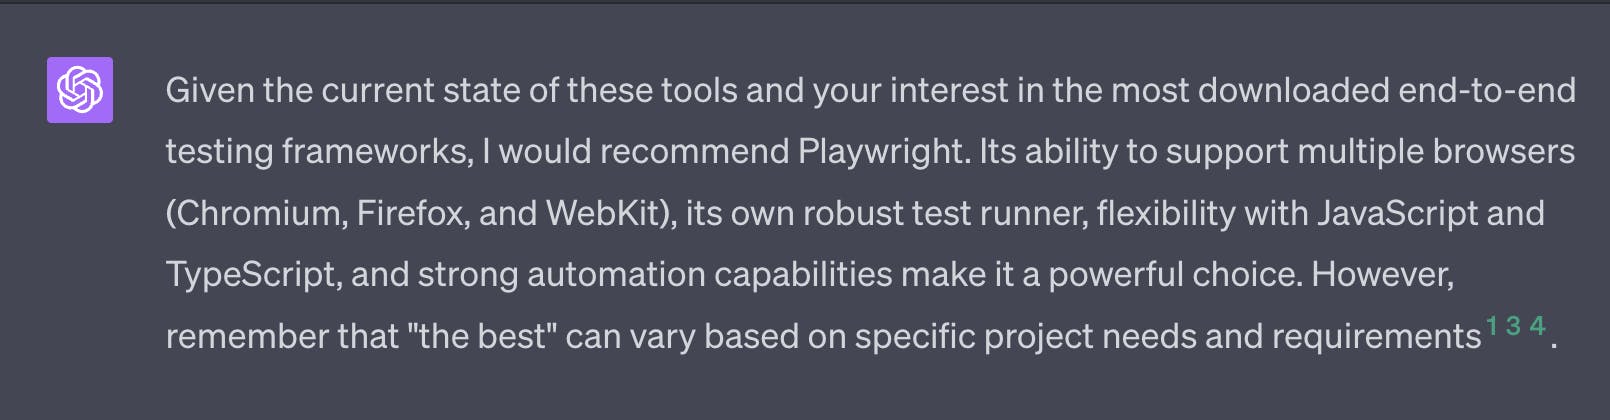 Given the current state of these tools and your interest in the most downlaoded end-to-end testing frameworks, I would recommend Playwright. Its ability to support multiple browsers (Chromium, Firefox, and Webkit), its own robut test runner, flexibility with JavaScript and TypeScript, and strong automation capabilities make it a powerful choice. However, remember that "the best" can vary based on specific project needs and requirements.